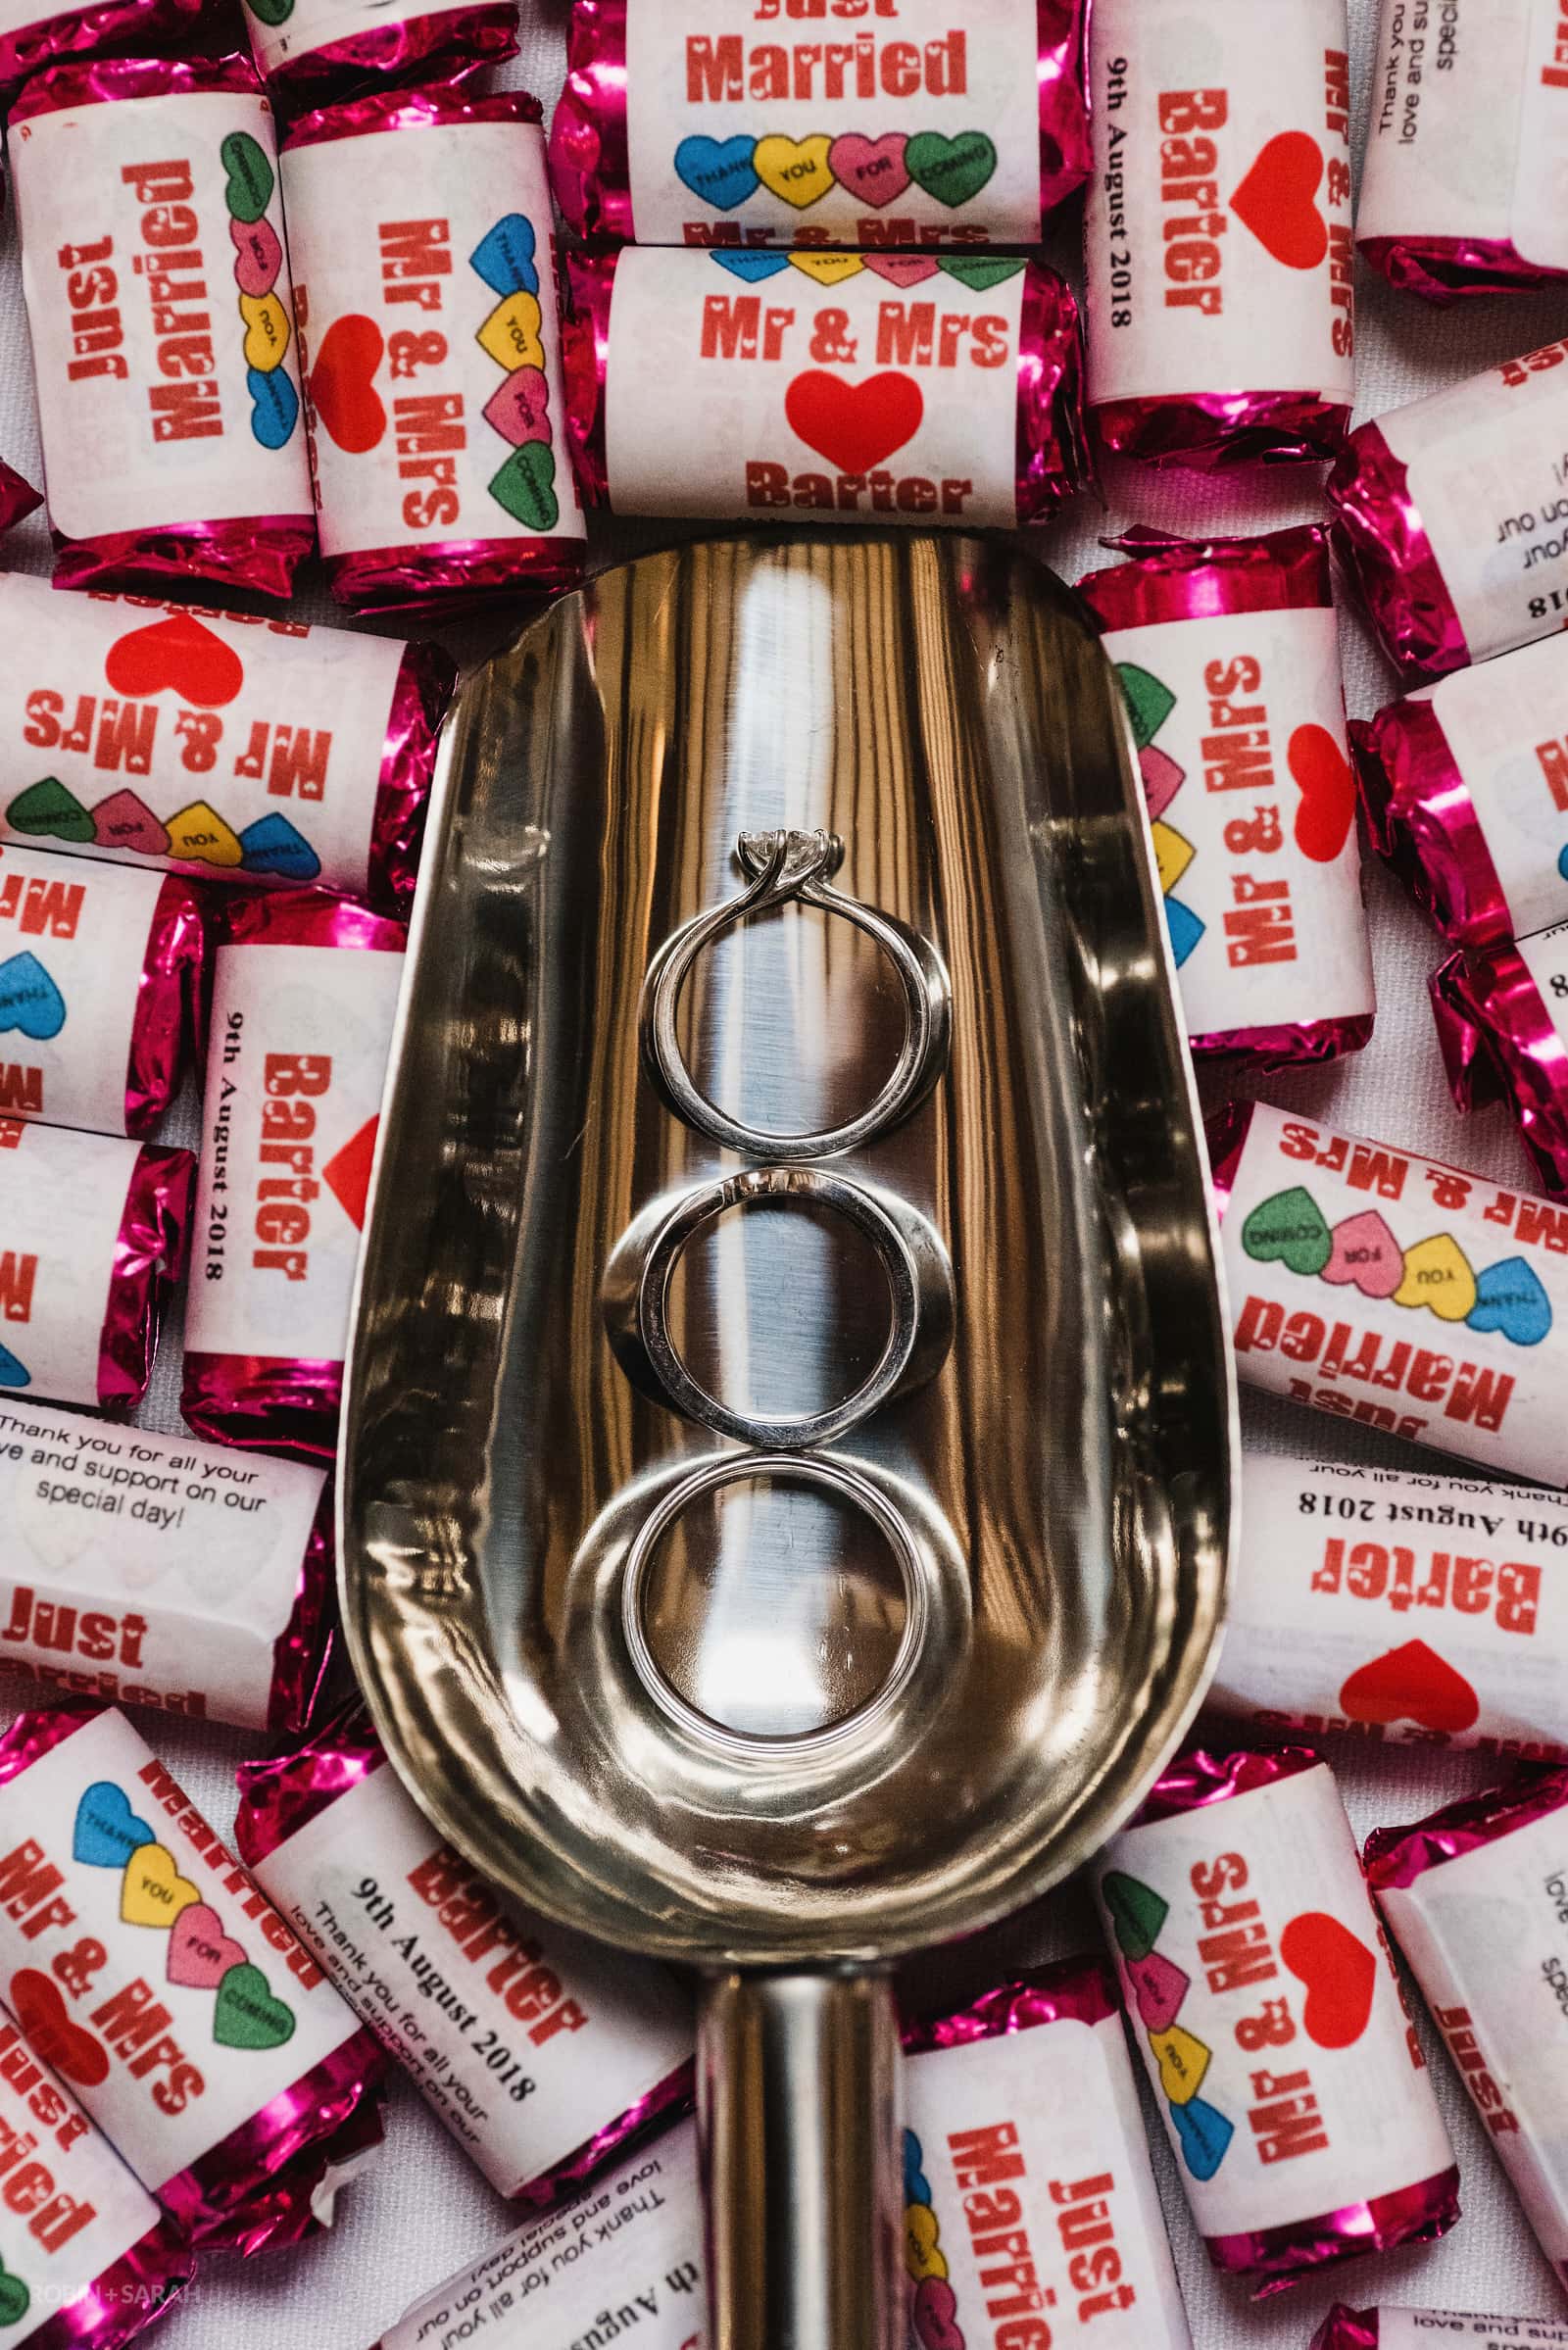 Detail of wedding and engagement rings in metal scoop surrounded by sweets